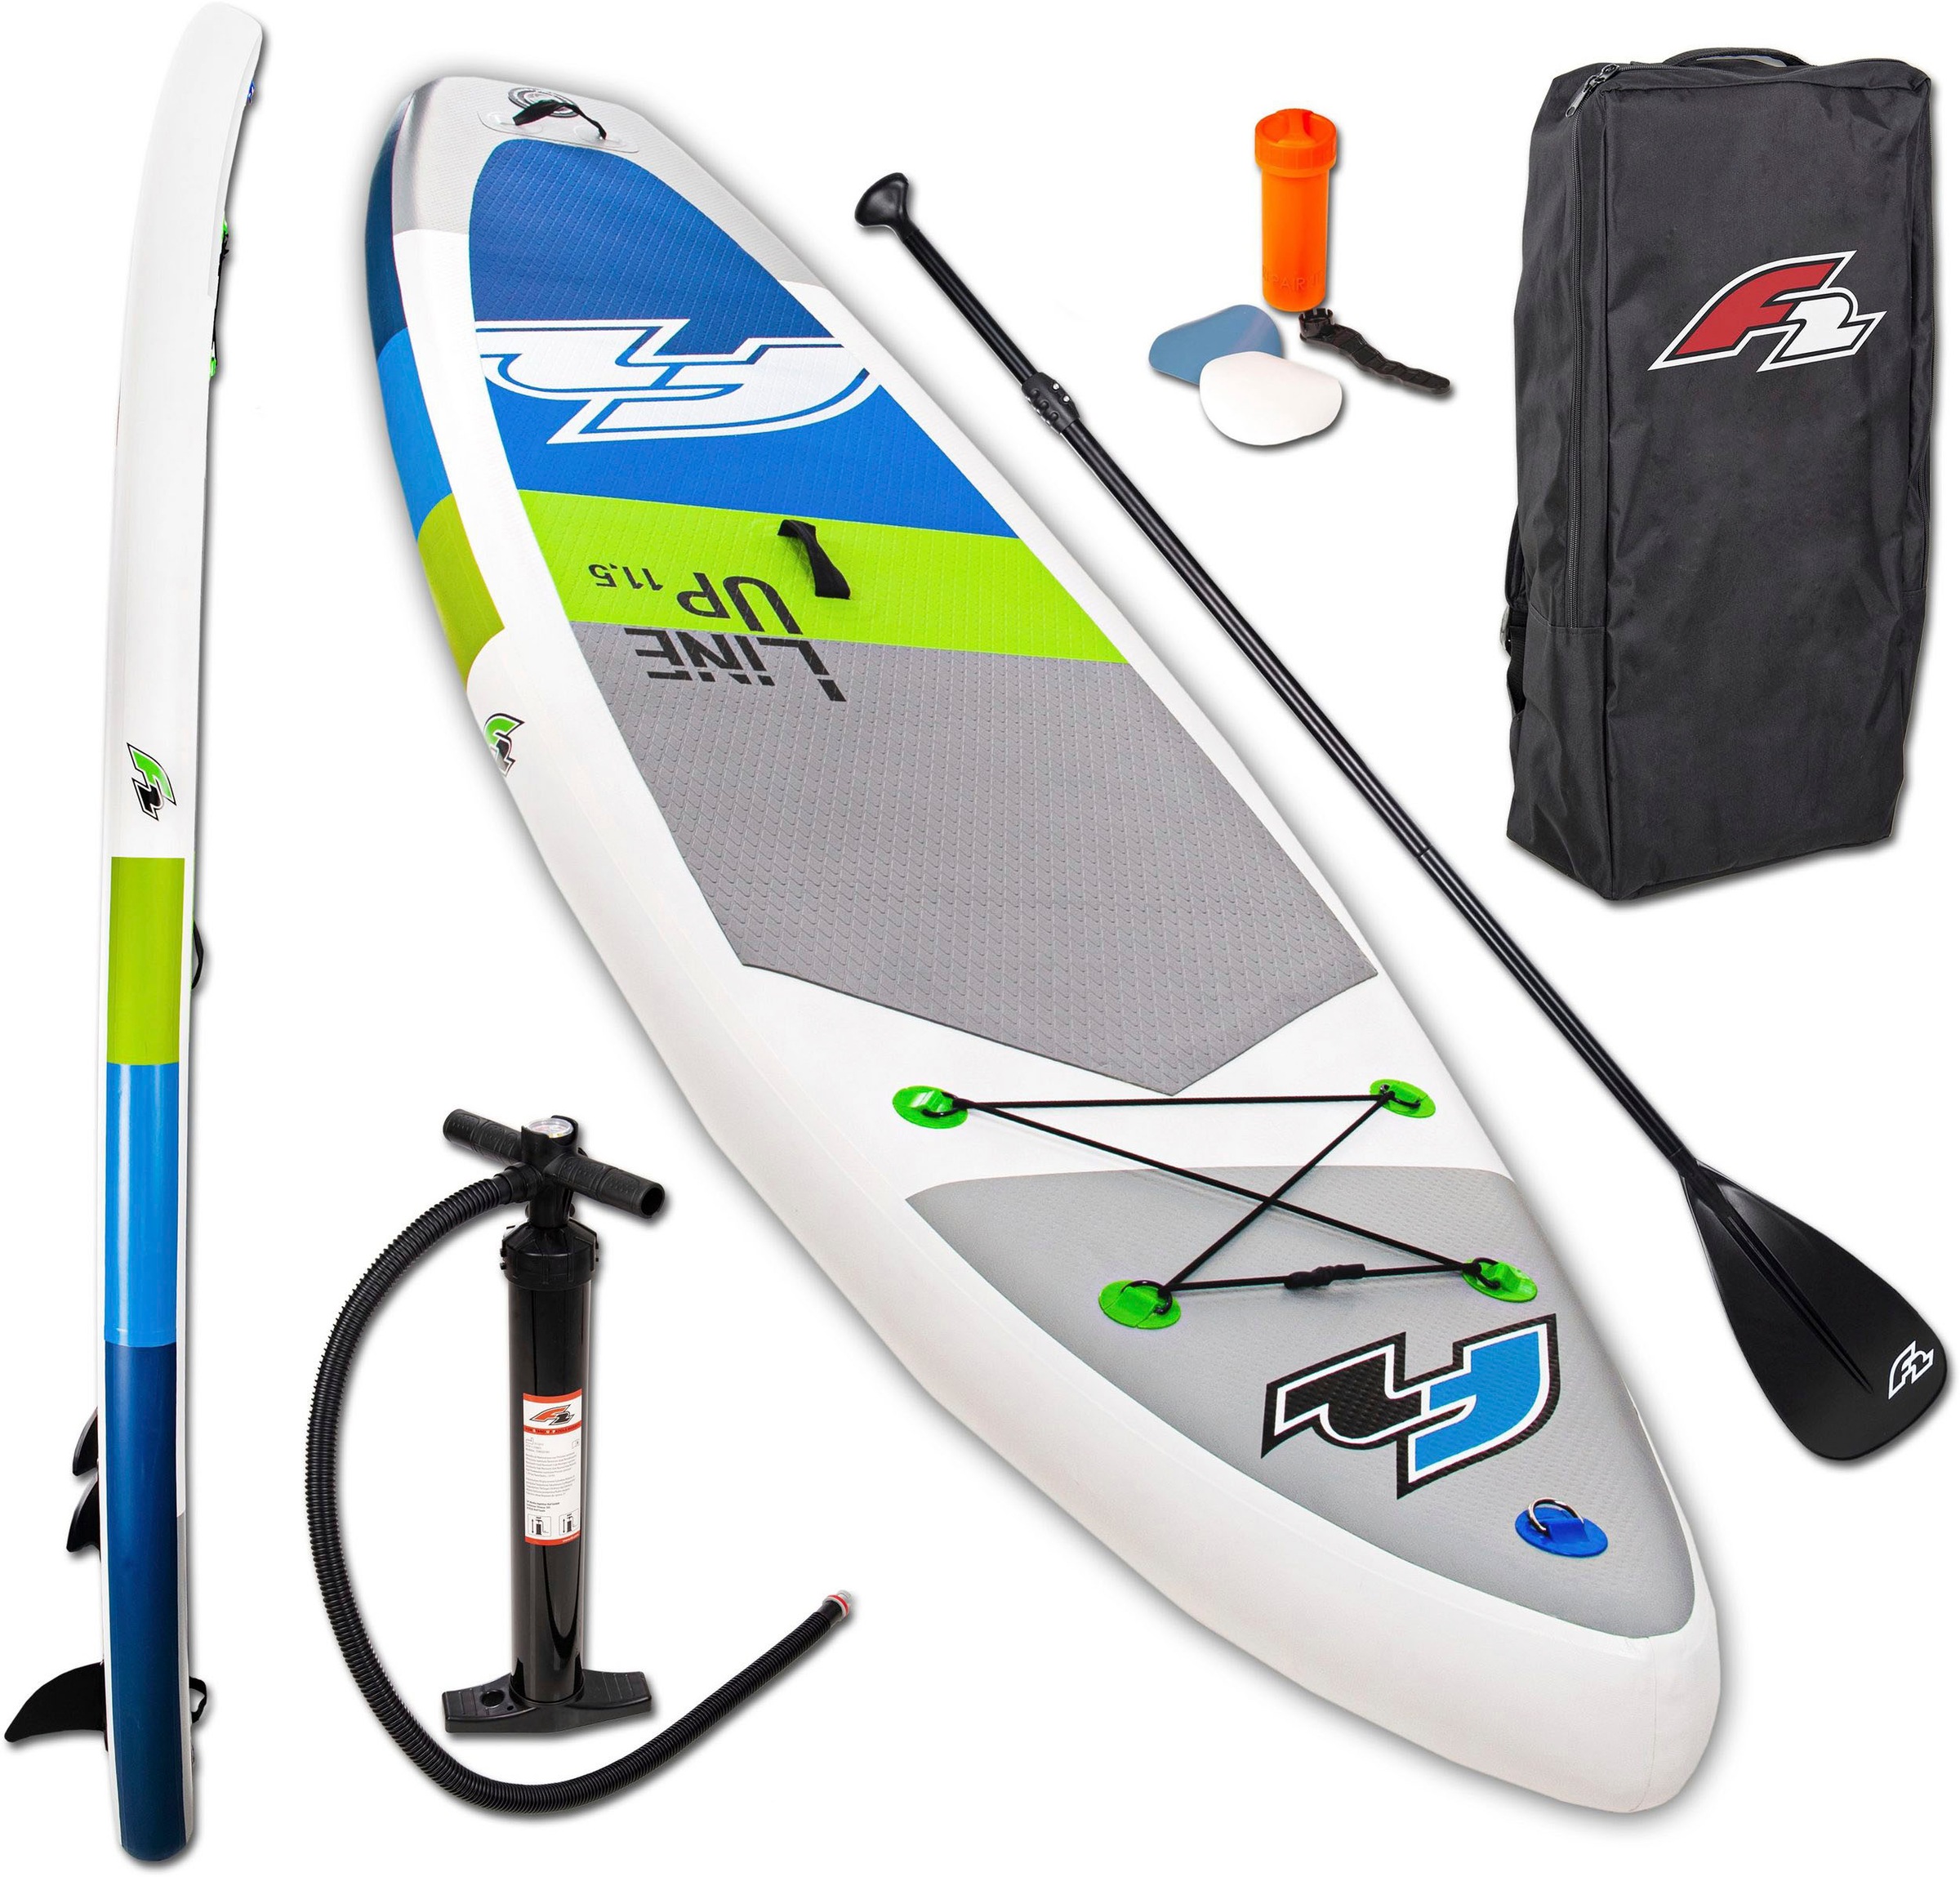 F2 Inflatable SUP-Board "F2 Line Up SMO blue mit Alupaddel", (Set, 5 tlg.), Stand Up Paddling